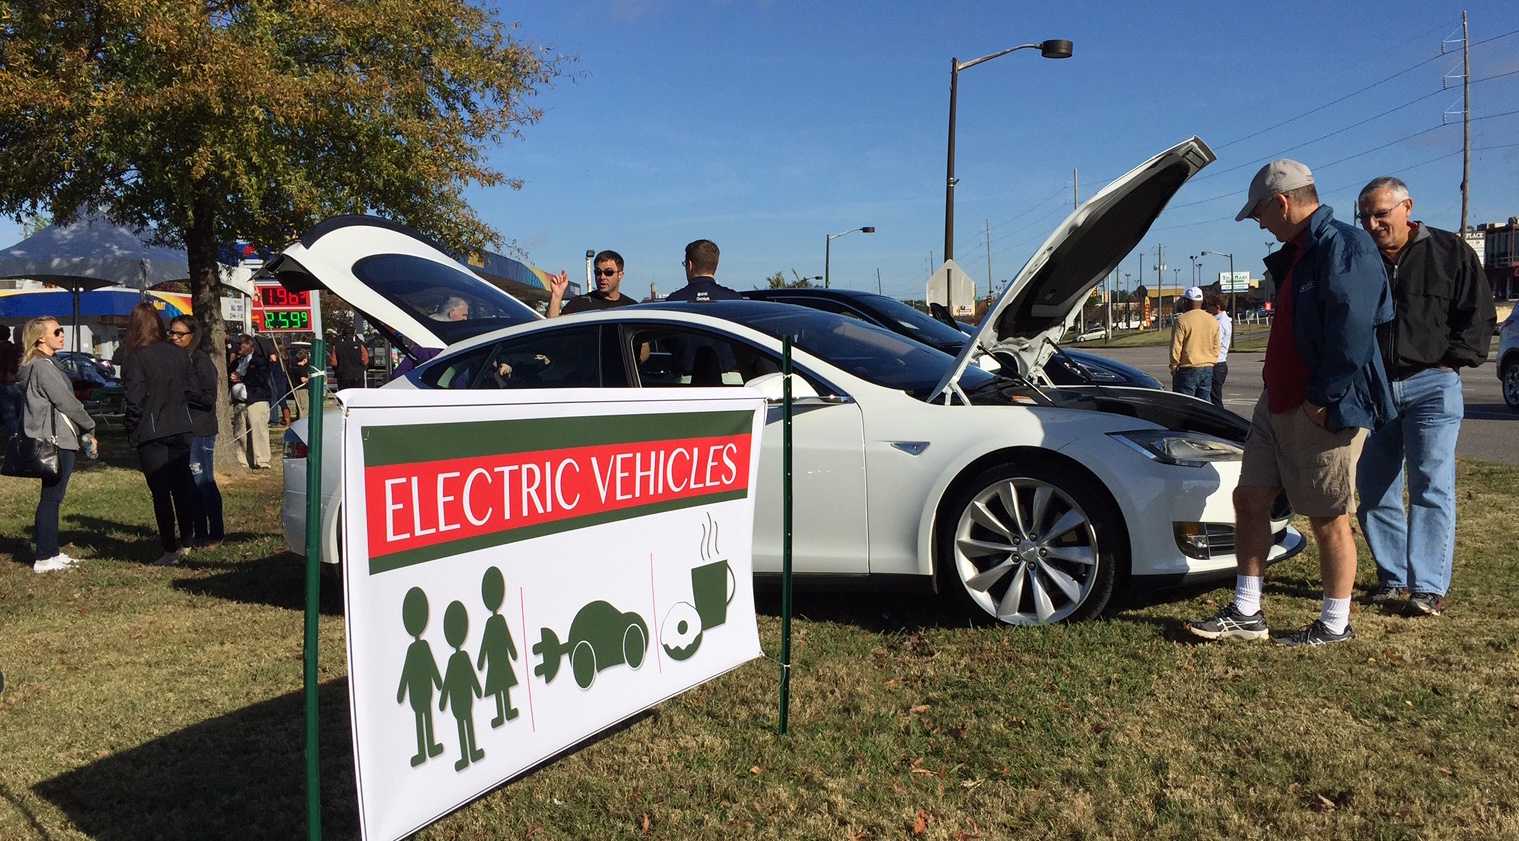 Electric vehicles shown to consumers